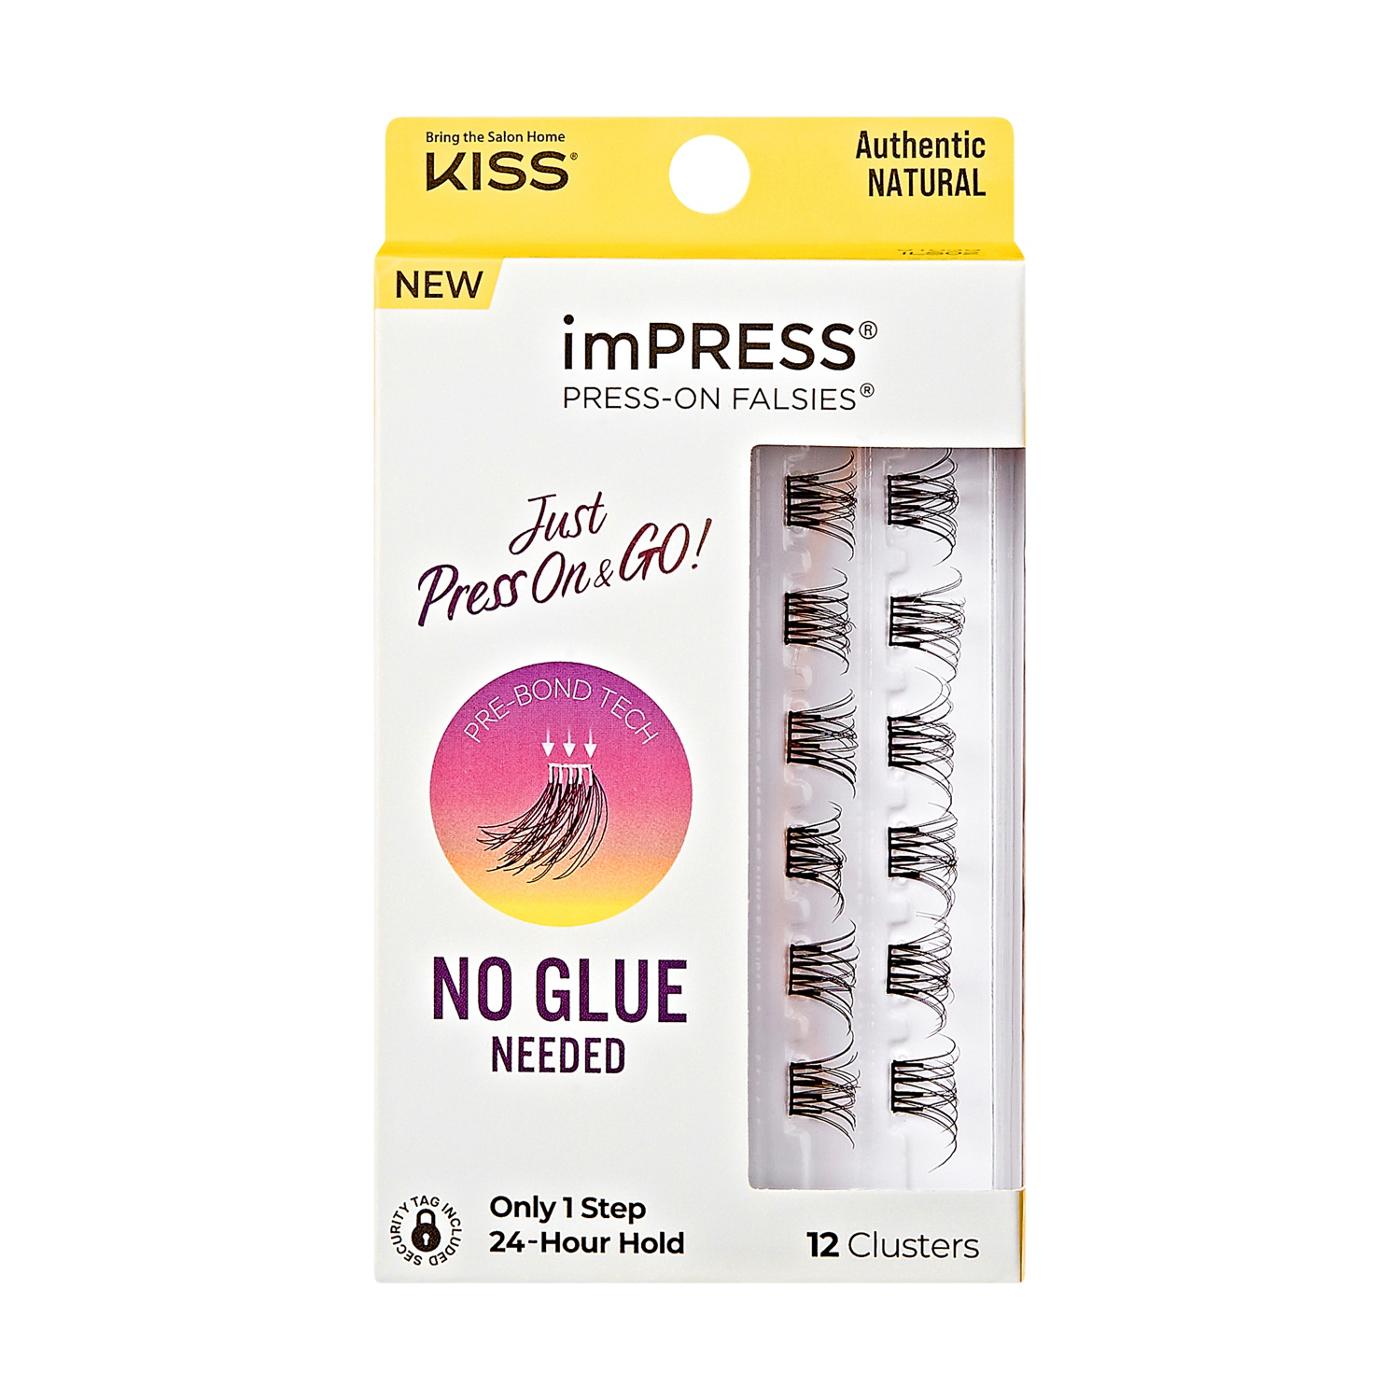 KISS imPRESS Press-On Falsies - Authentic Natural ; image 1 of 7